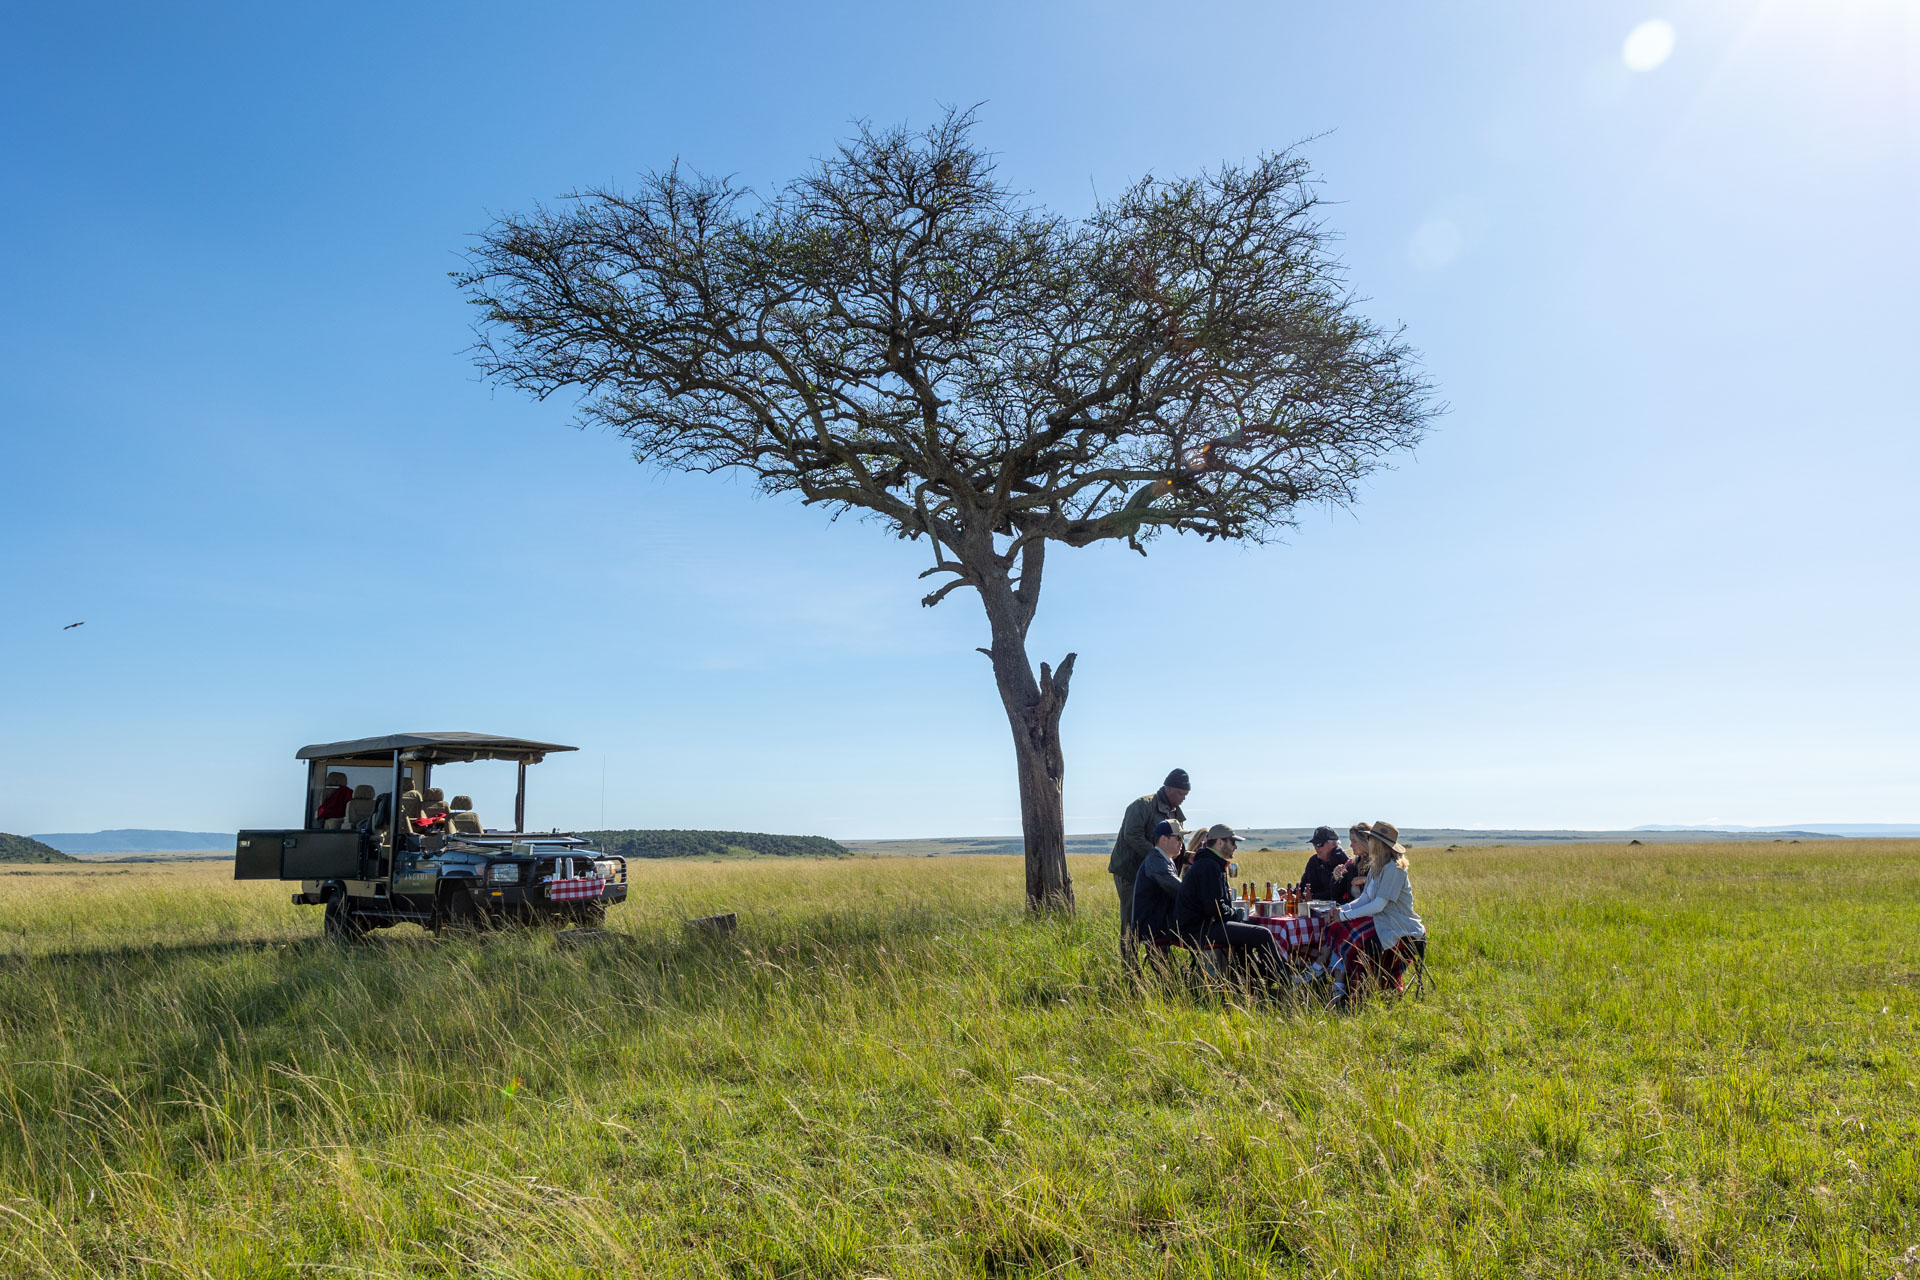 Above: A picture-perfect example of a peaceful picnic in the Mara